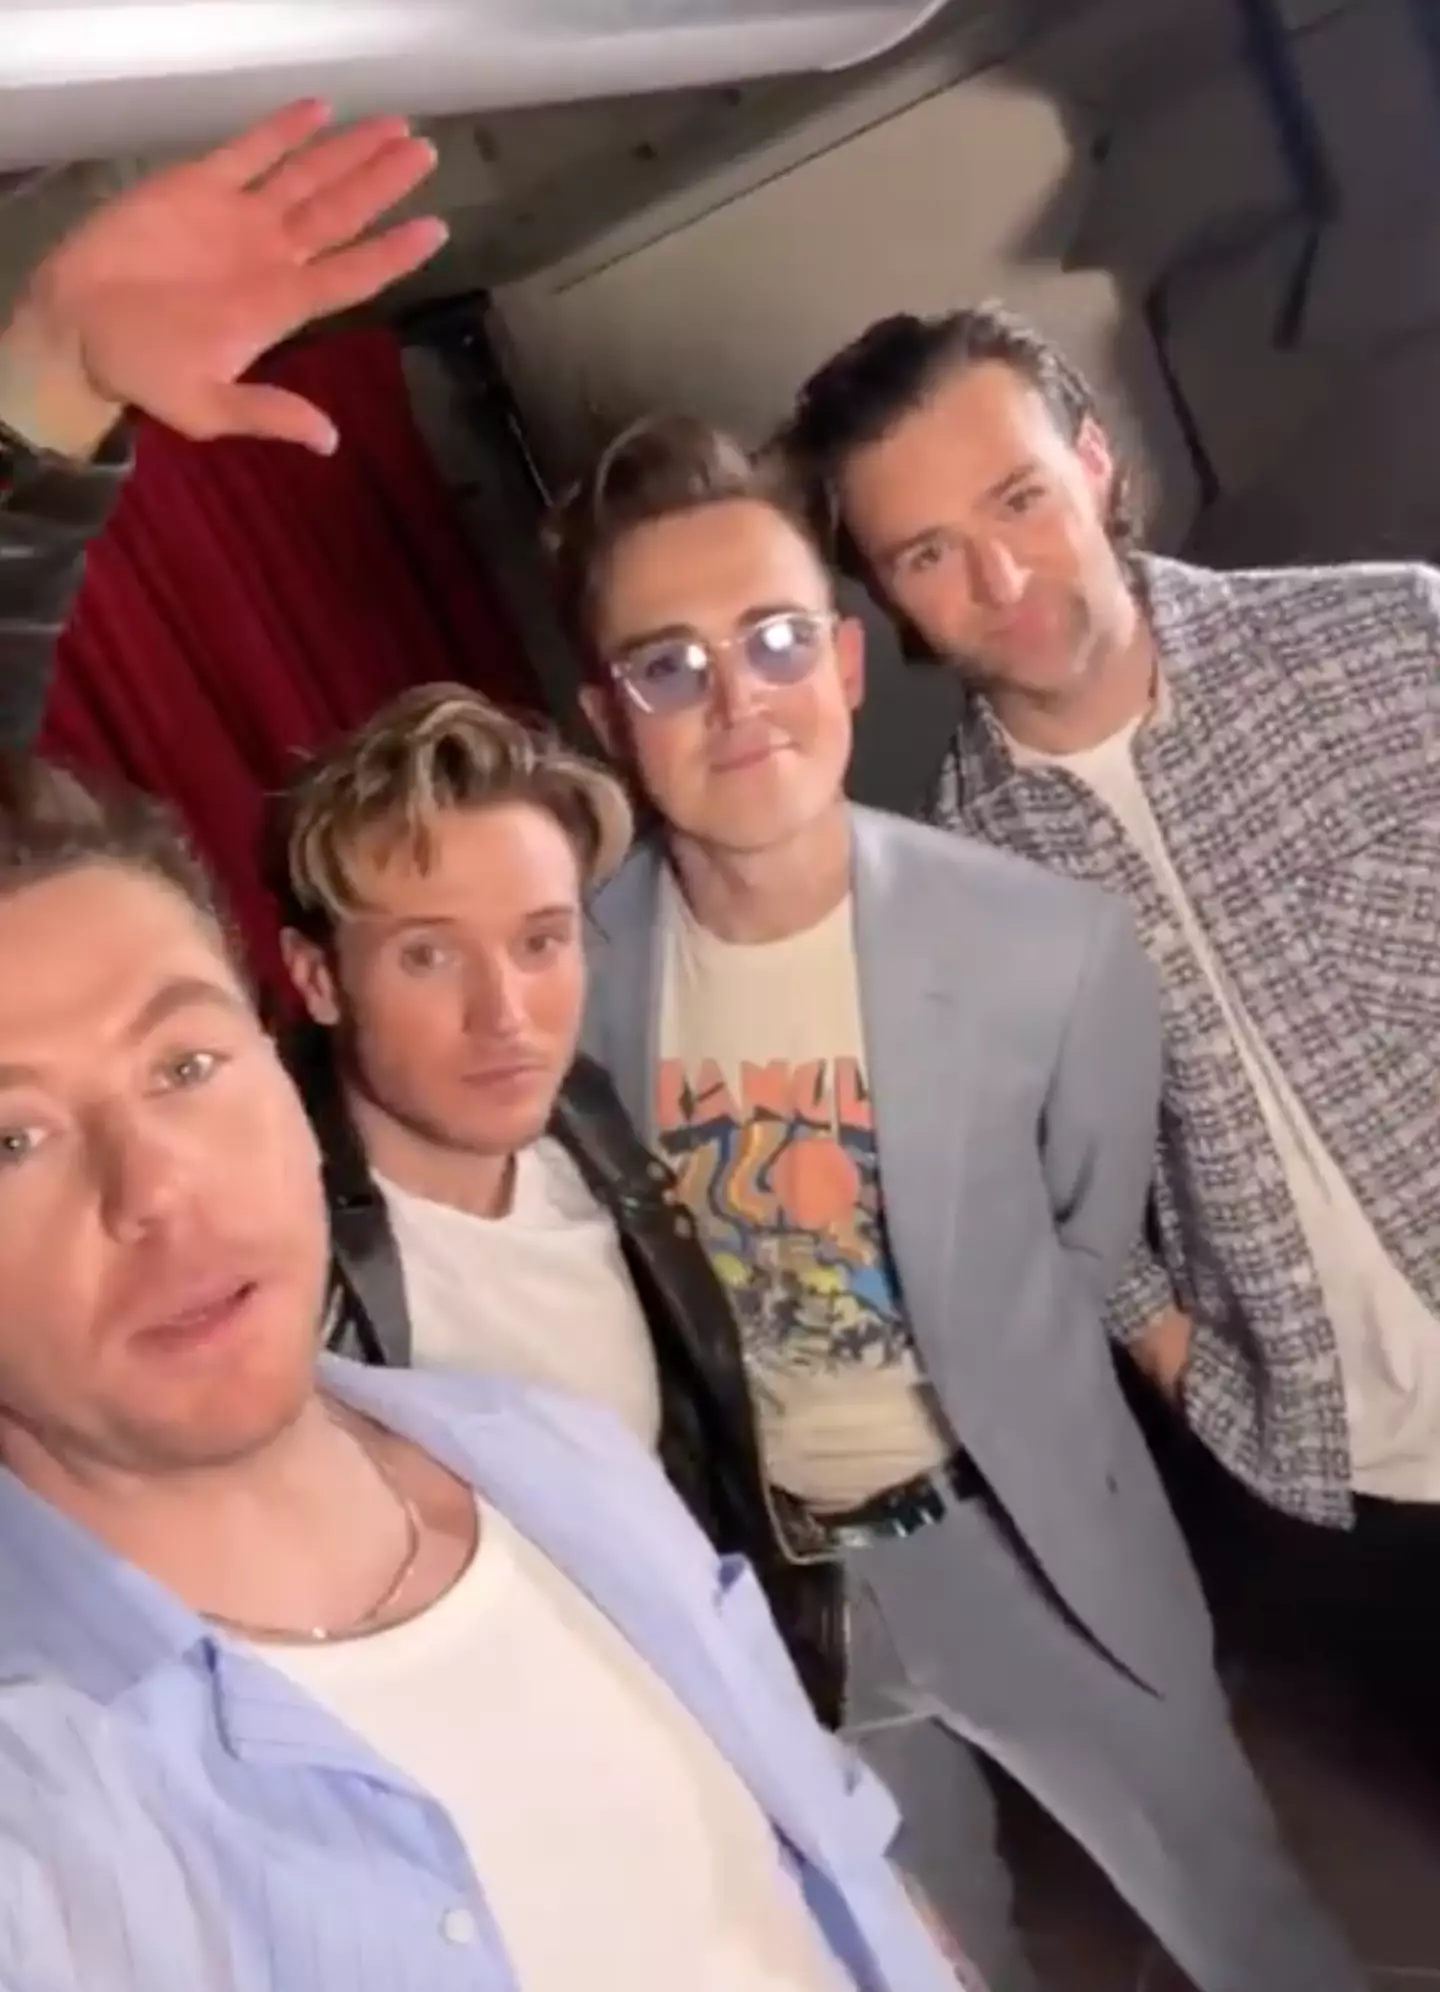 British boy band McFly are even making an appearance on Comic Relief.